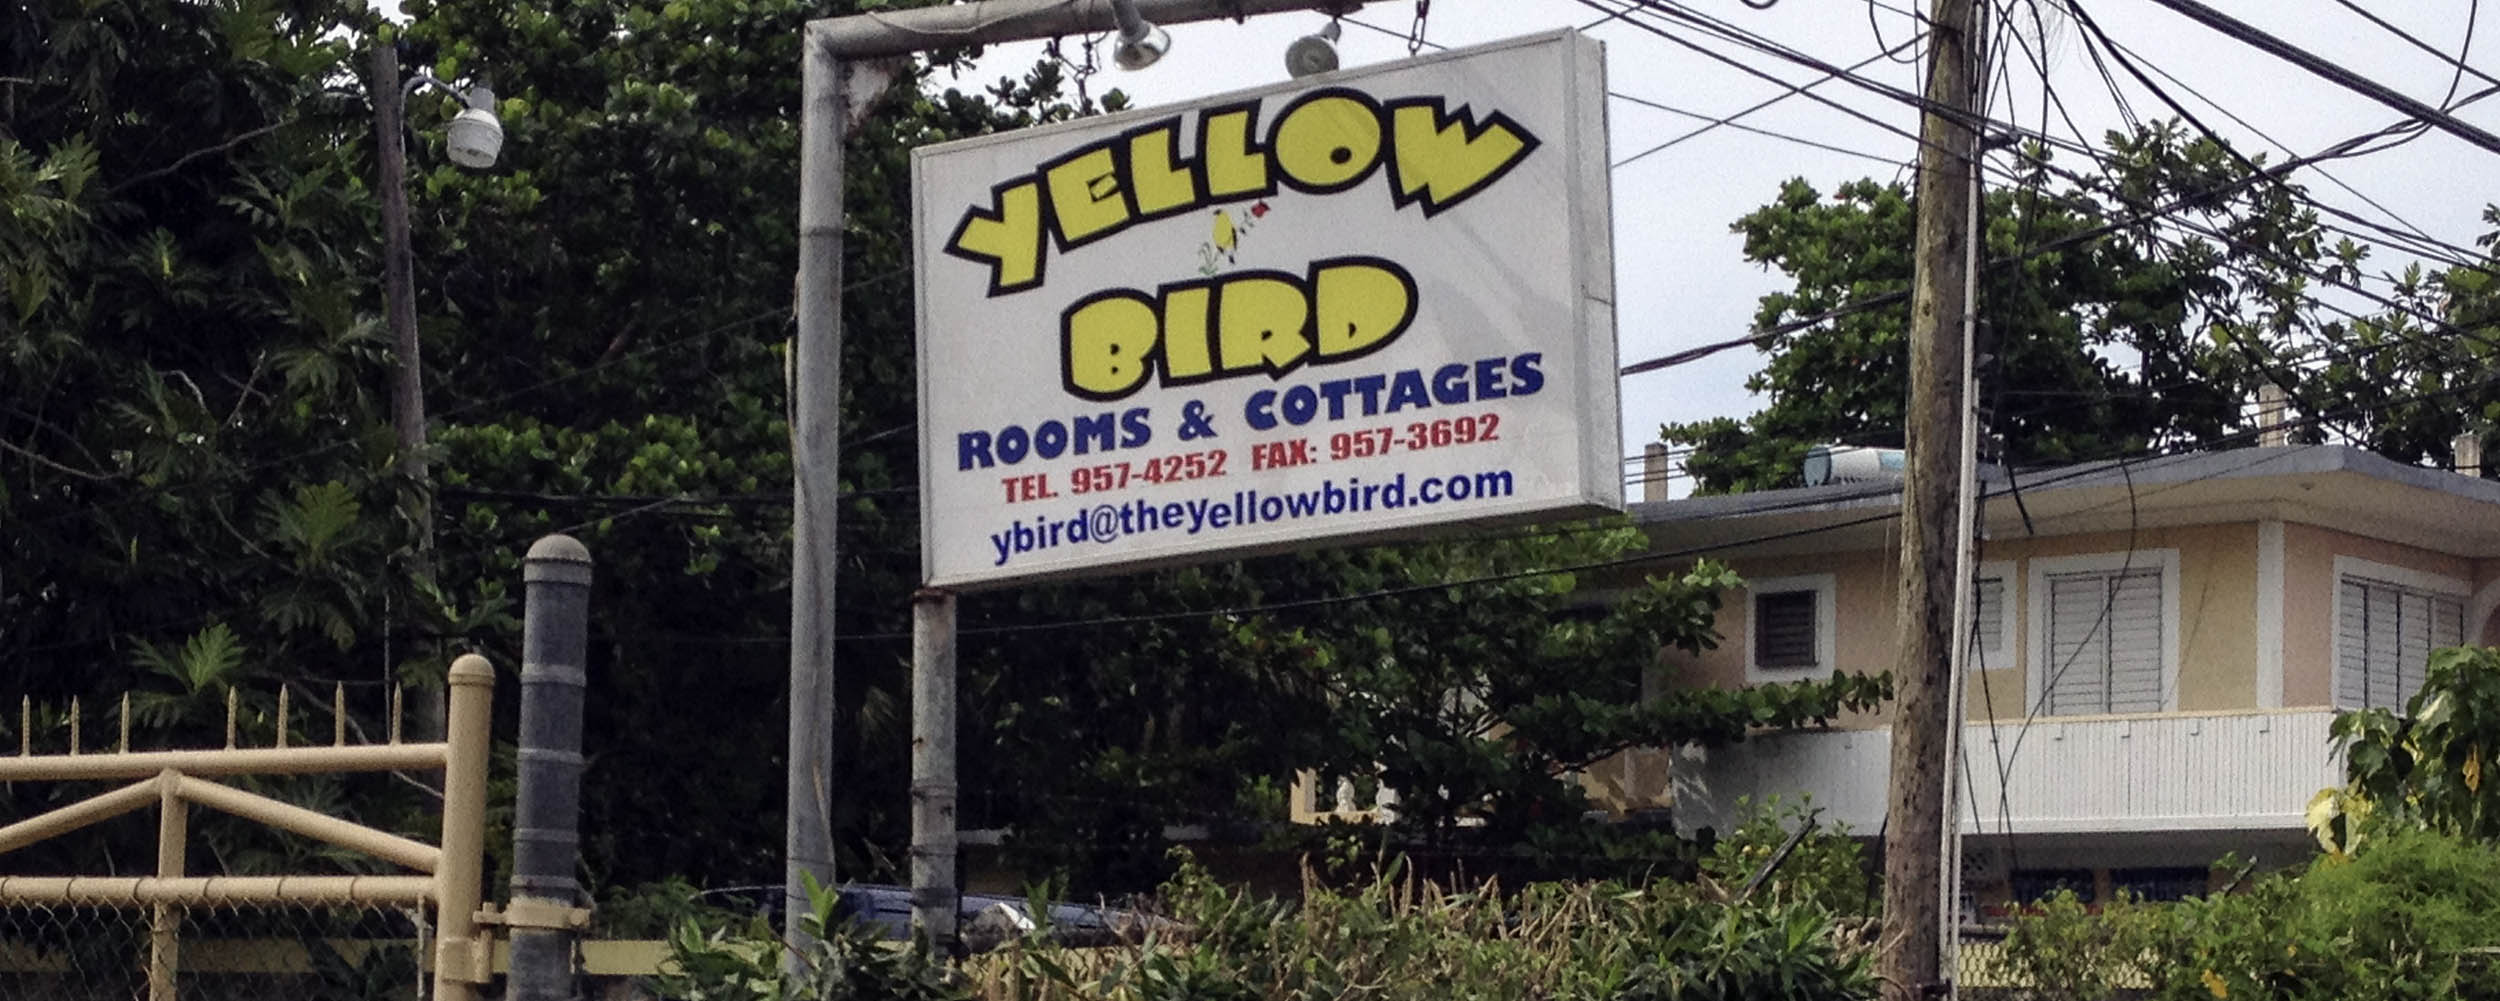 Yellow Bird Rooms and Cottages - Negril Jamaica